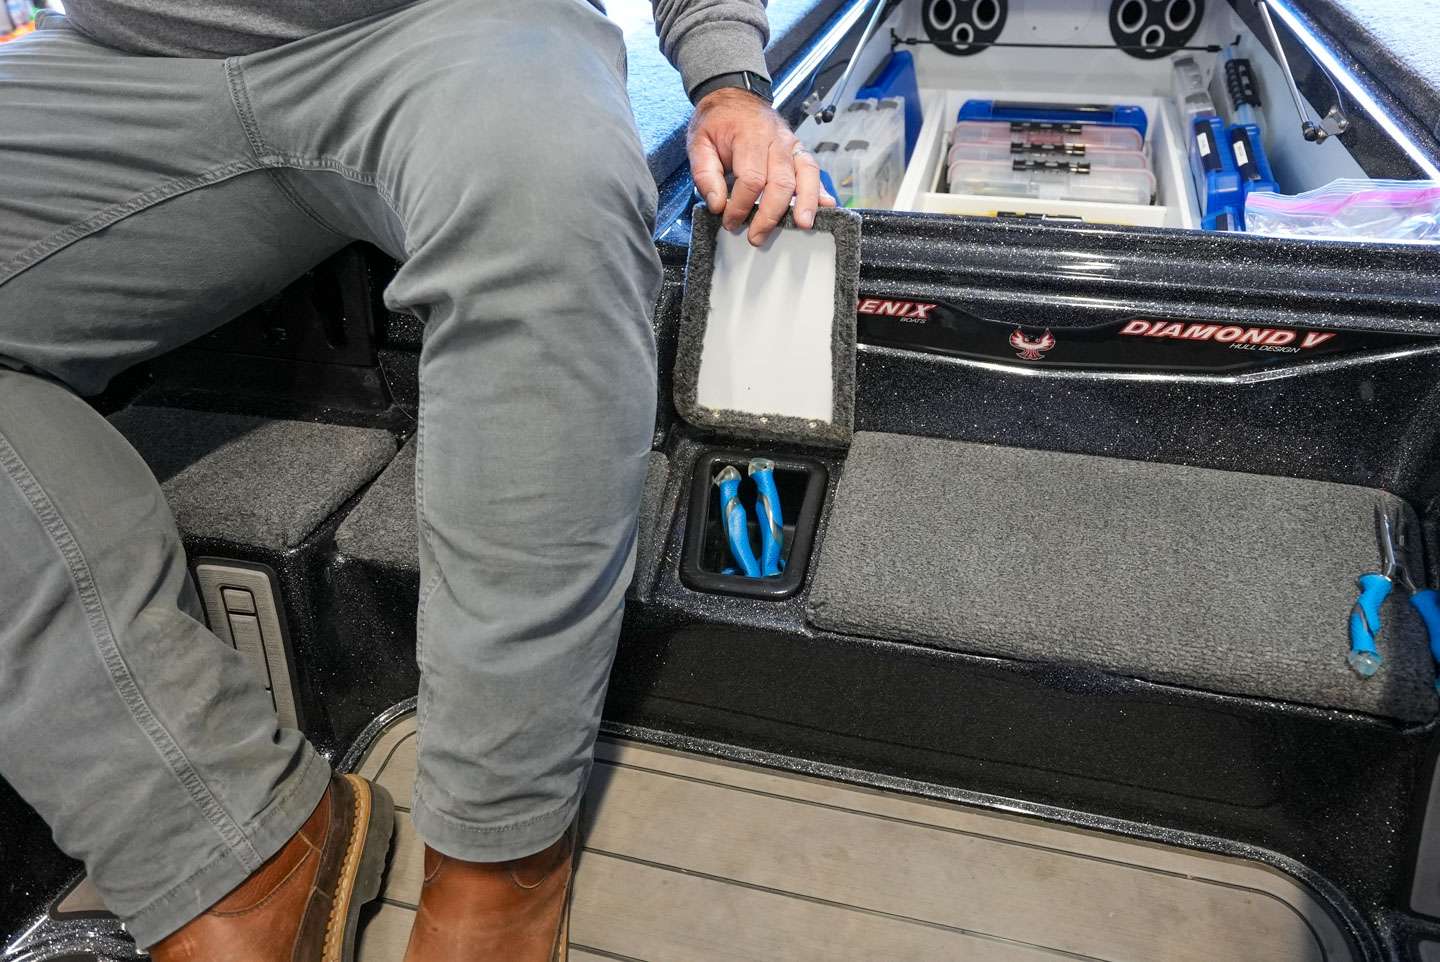 Phoenix boats have a unique step that serves as a cooler and a space for additional storage. Davis stores his tools in the compartment next to the cooler. 